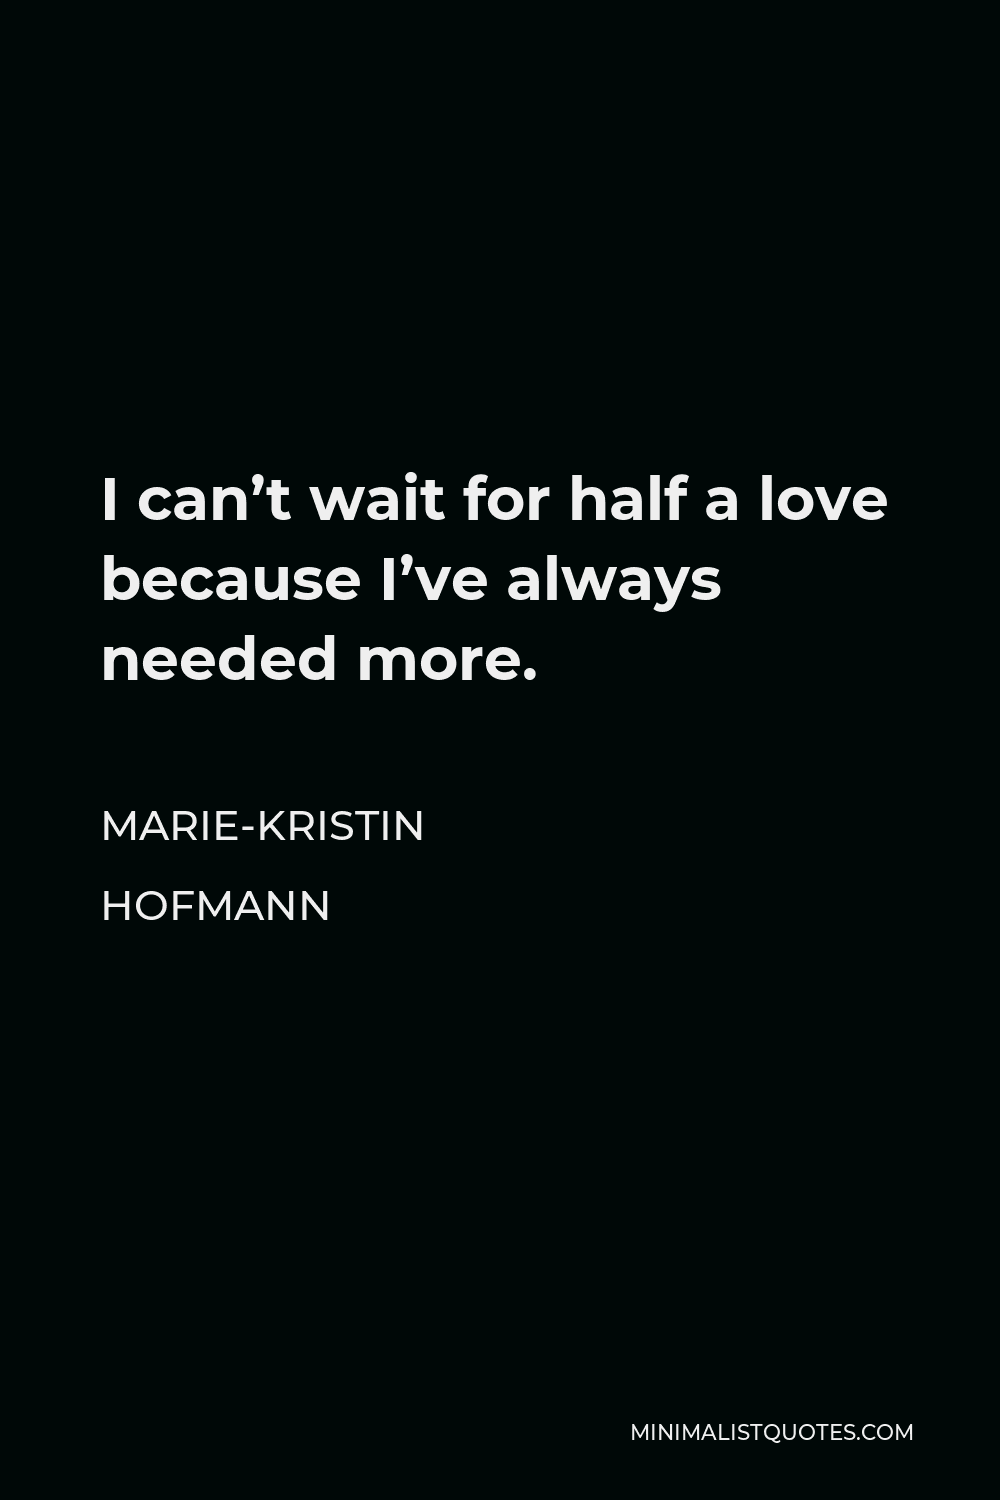 Marie-Kristin Hofmann Quote - I can’t wait for half a love because I’ve always needed more.